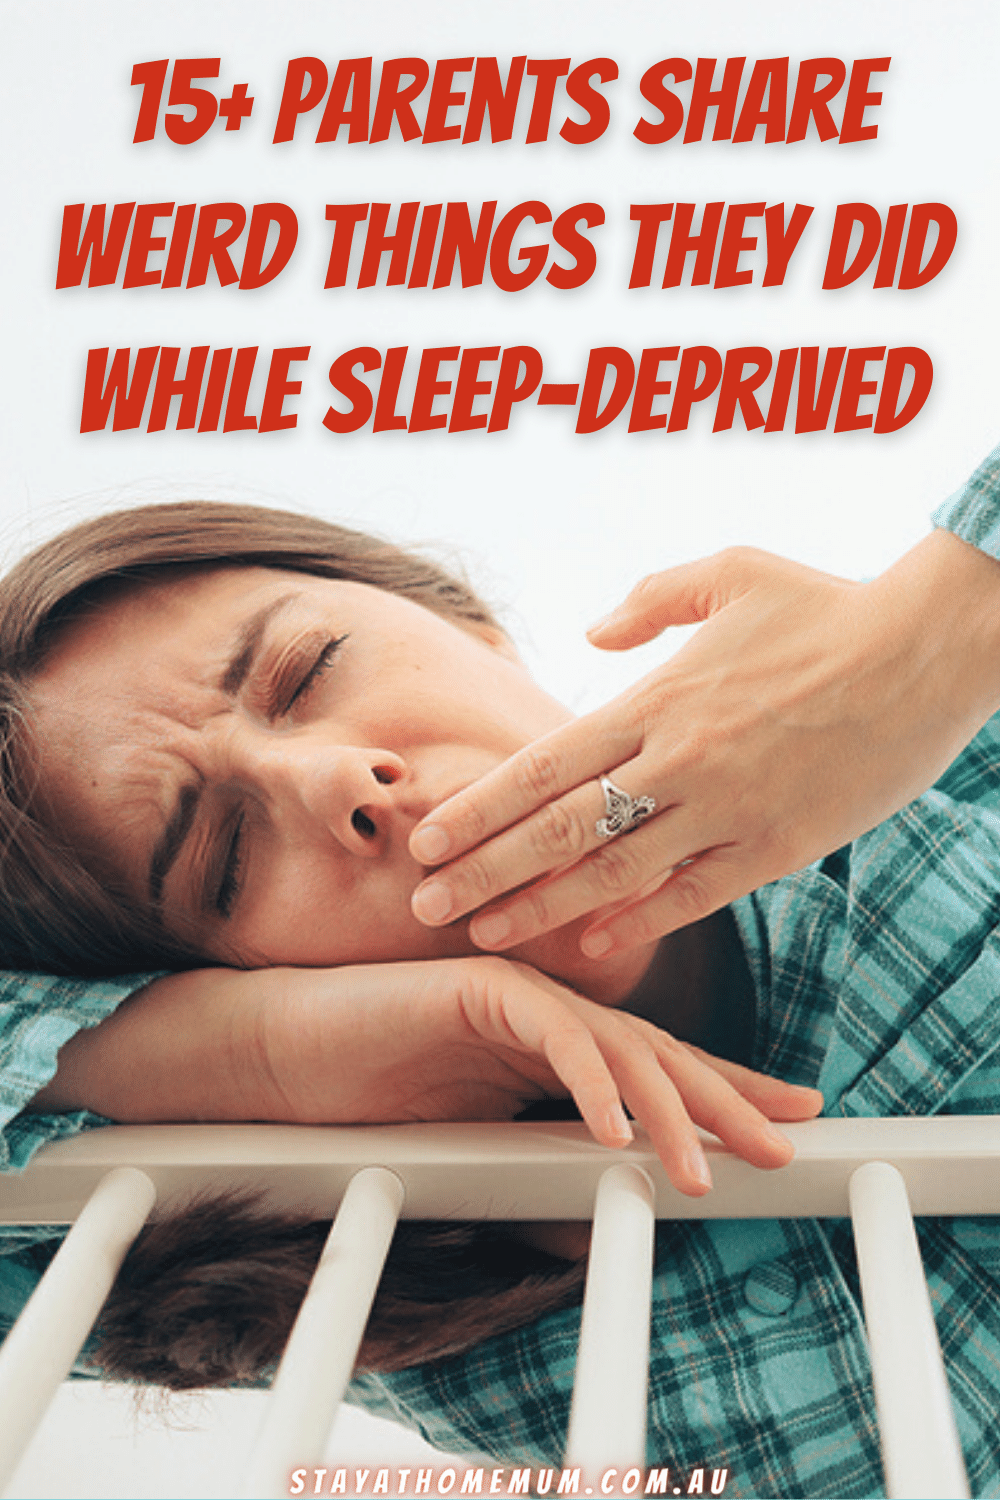 15+ Parents Share Weird Things They Did While Sleep-Deprived | Stay At Home Mum